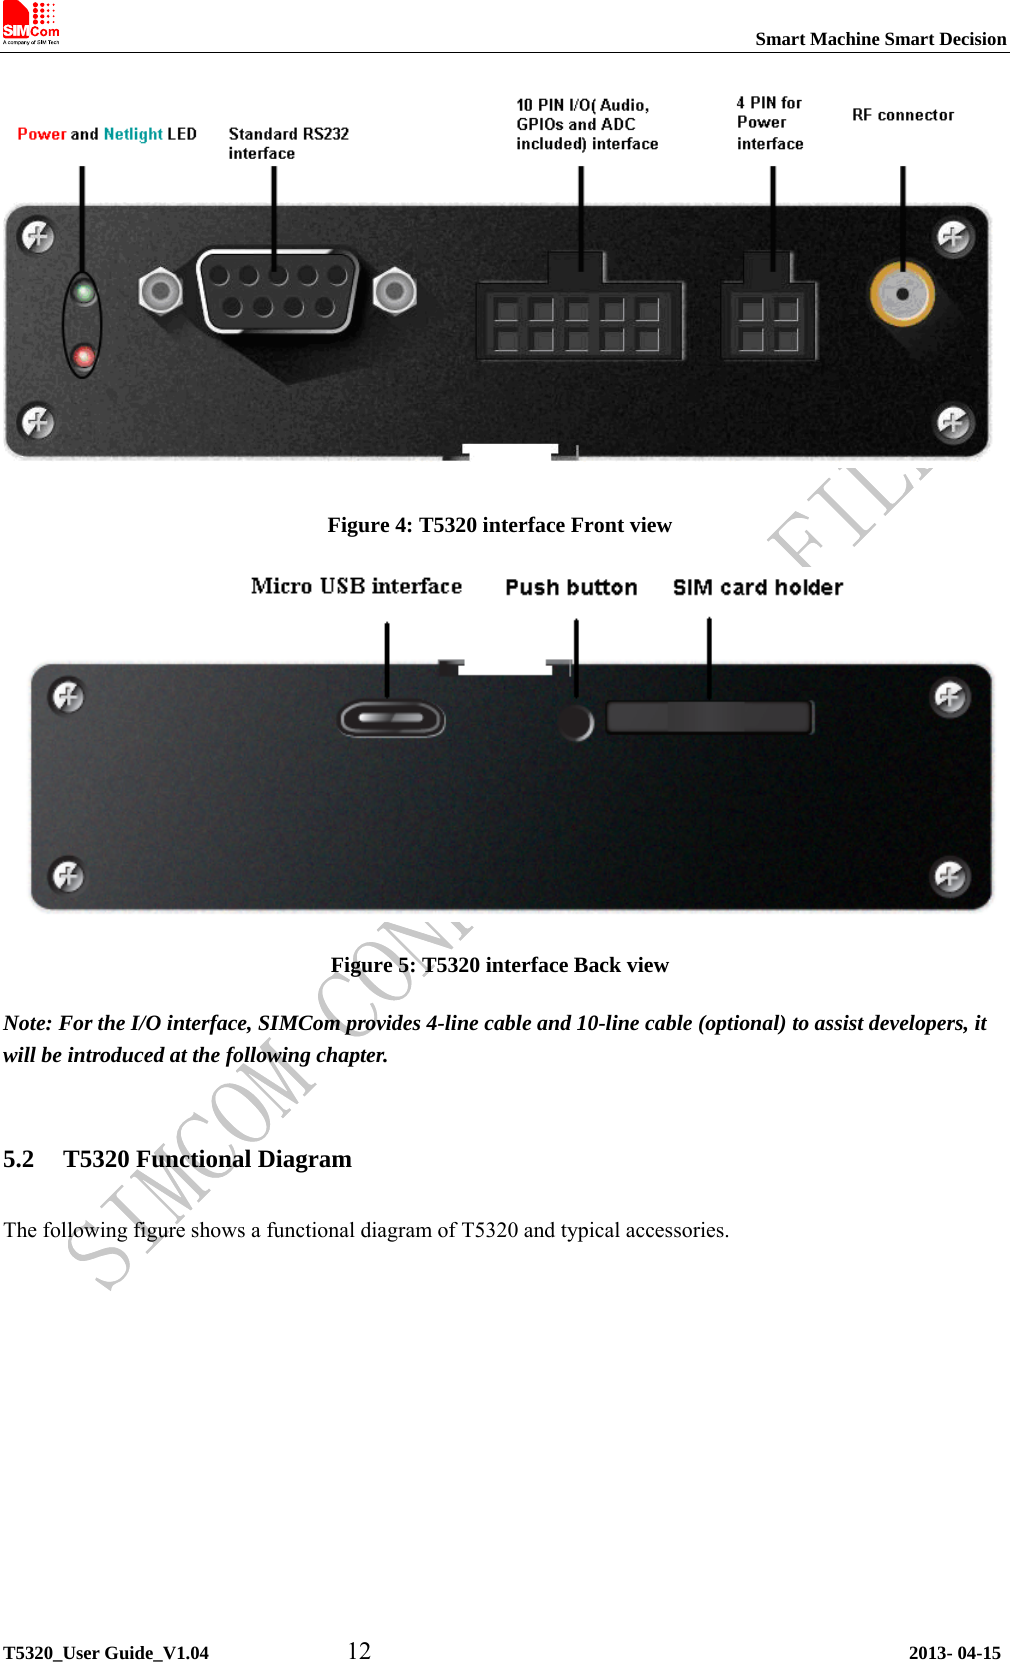                                                                           Smart Machine Smart Decision             T5320_User Guide_V1.04           12                                           2013- 04-15  Figure 4: T5320 interface Front view  Figure 5: T5320 interface Back view Note: For the I/O interface, SIMCom provides 4-line cable and 10-line cable (optional) to assist developers, it will be introduced at the following chapter.  5.2 T5320 Functional Diagram The following figure shows a functional diagram of T5320 and typical accessories.  